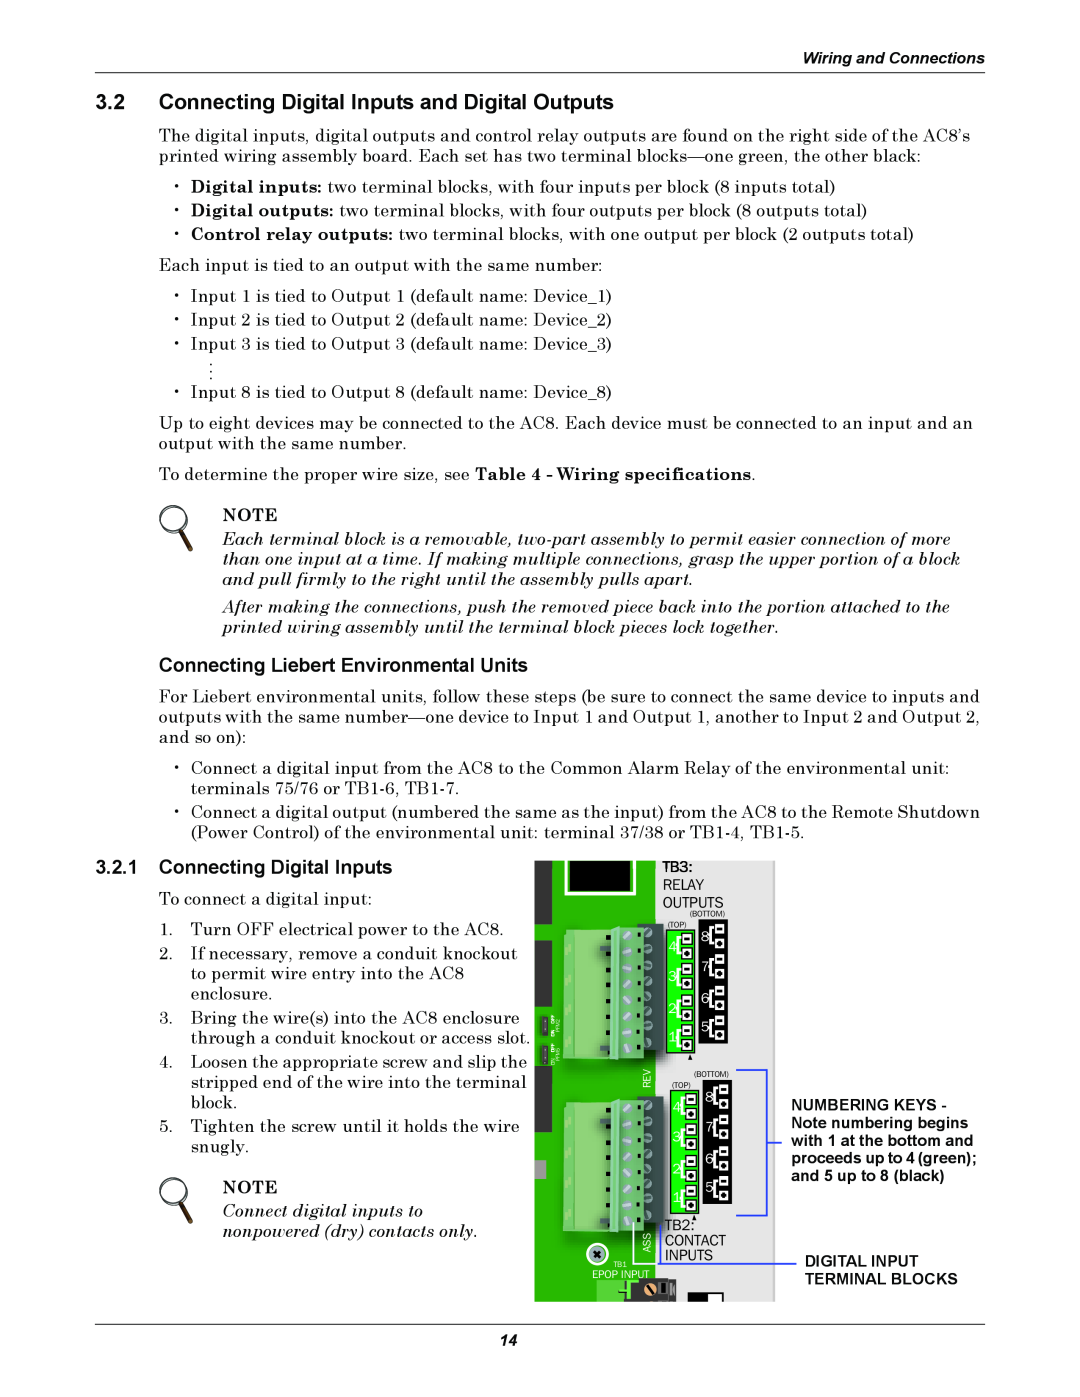 Emerson AC8 user manual 3.2Connecting Digital Inputs and Digital Outputs, Connecting Liebert Environmental Units 